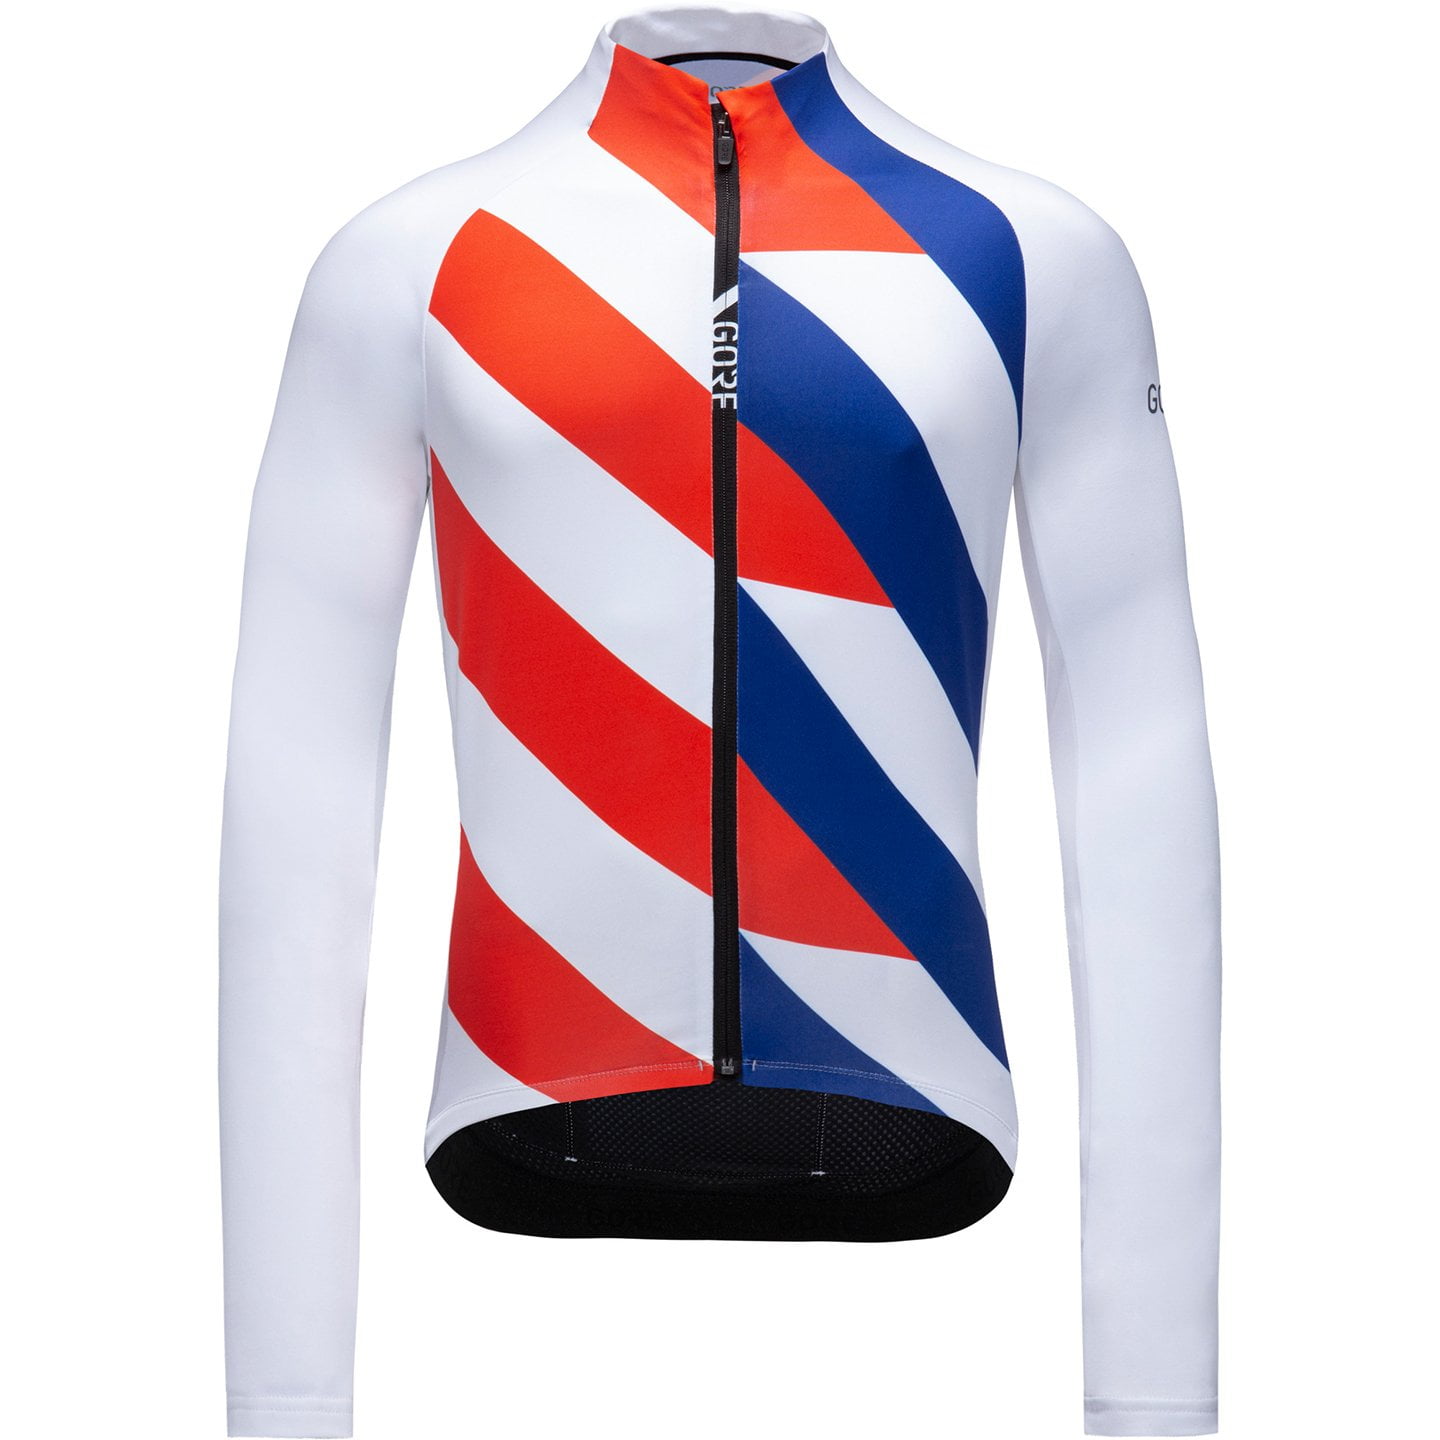 GORE WEAR C5 Long Sleeve Jersey, for men, size L, Cycling jersey, Cycling clothing